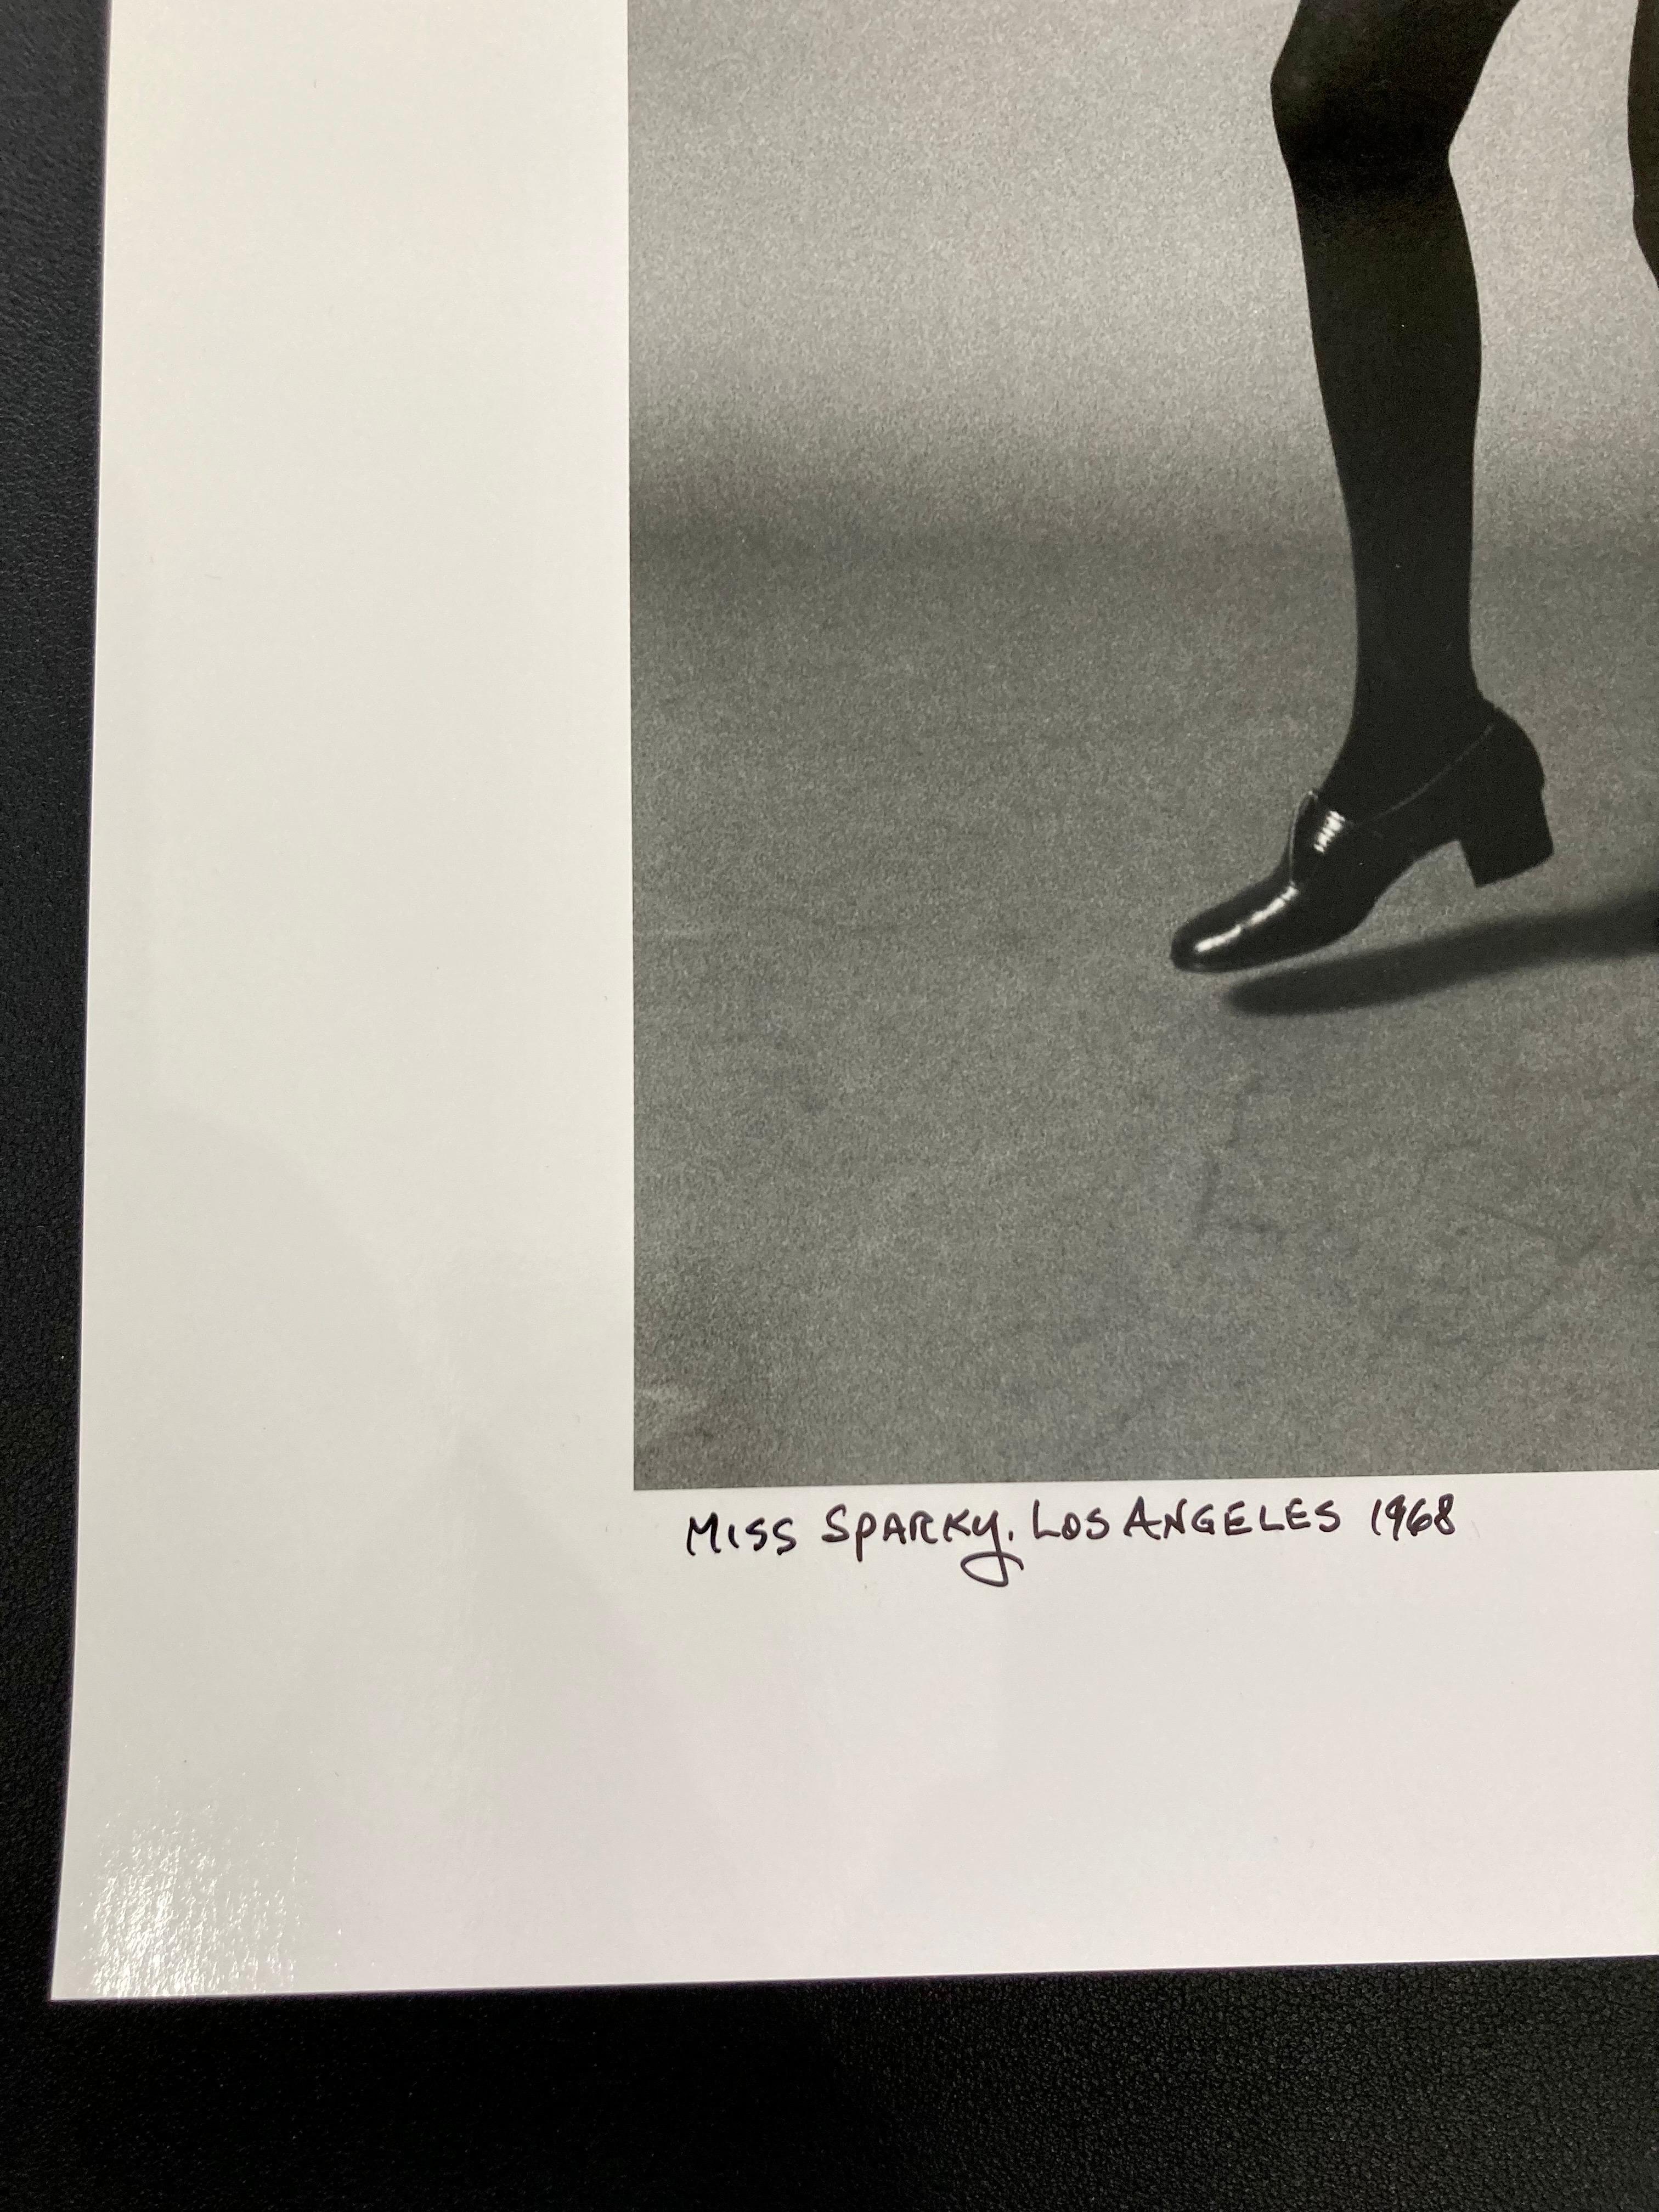 Miss Sparky 1968 Groupies, signed limited edition silver gelatin print For Sale 1